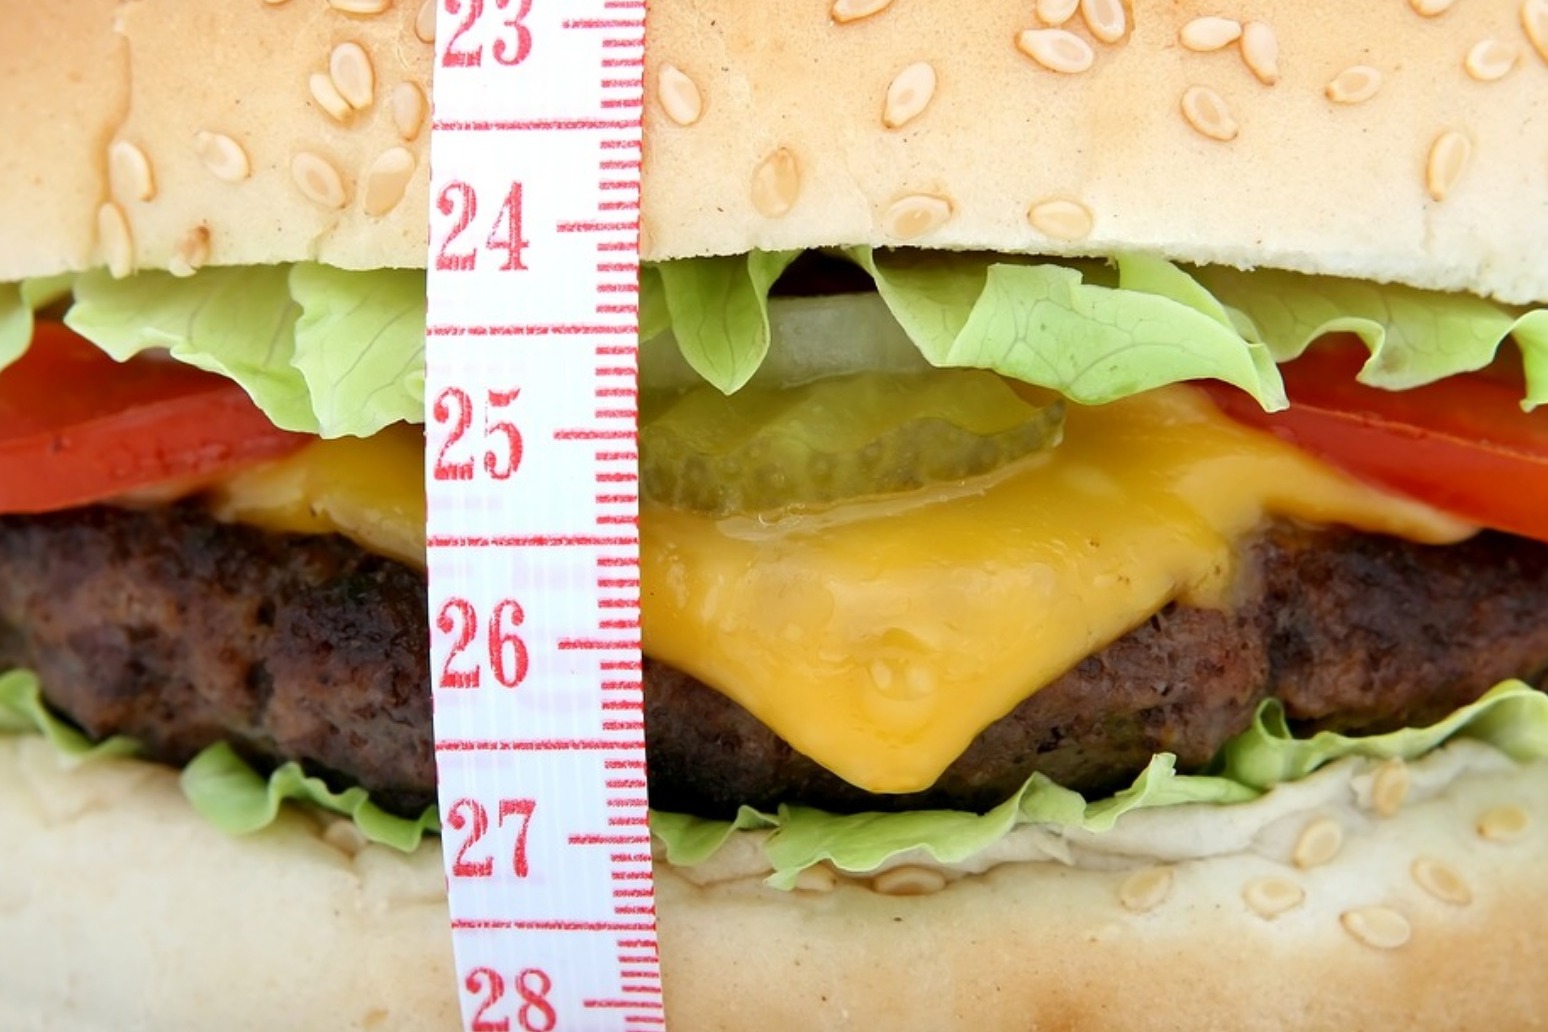 Severe obesity in children aged 10-11-years-old has reached record high 